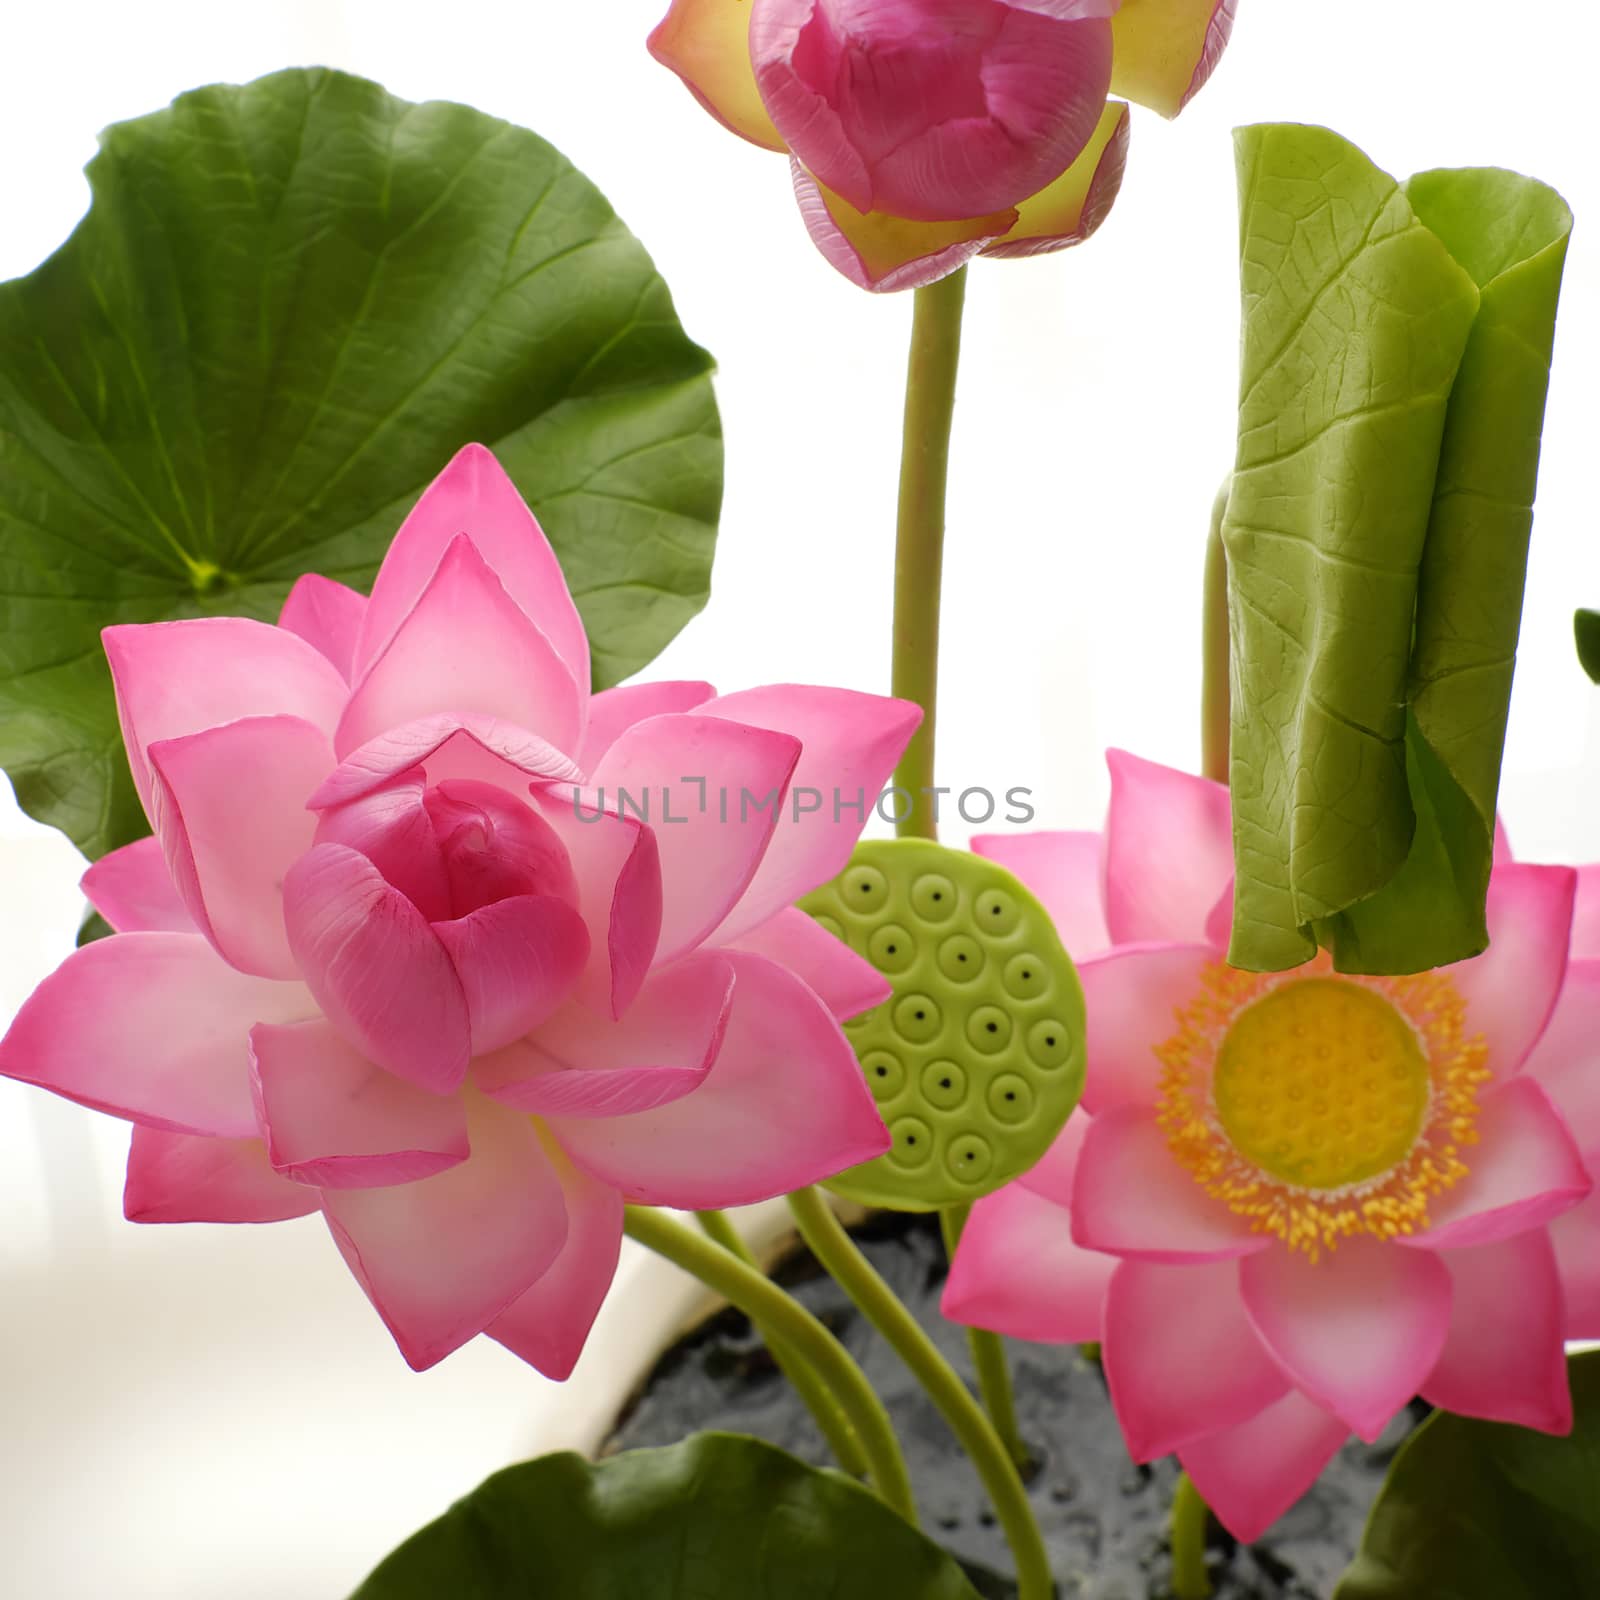 Artificial flower, handmade clay lotus flower with green leaf and pink petal, diy art product for home decoration, close up artwork on white background